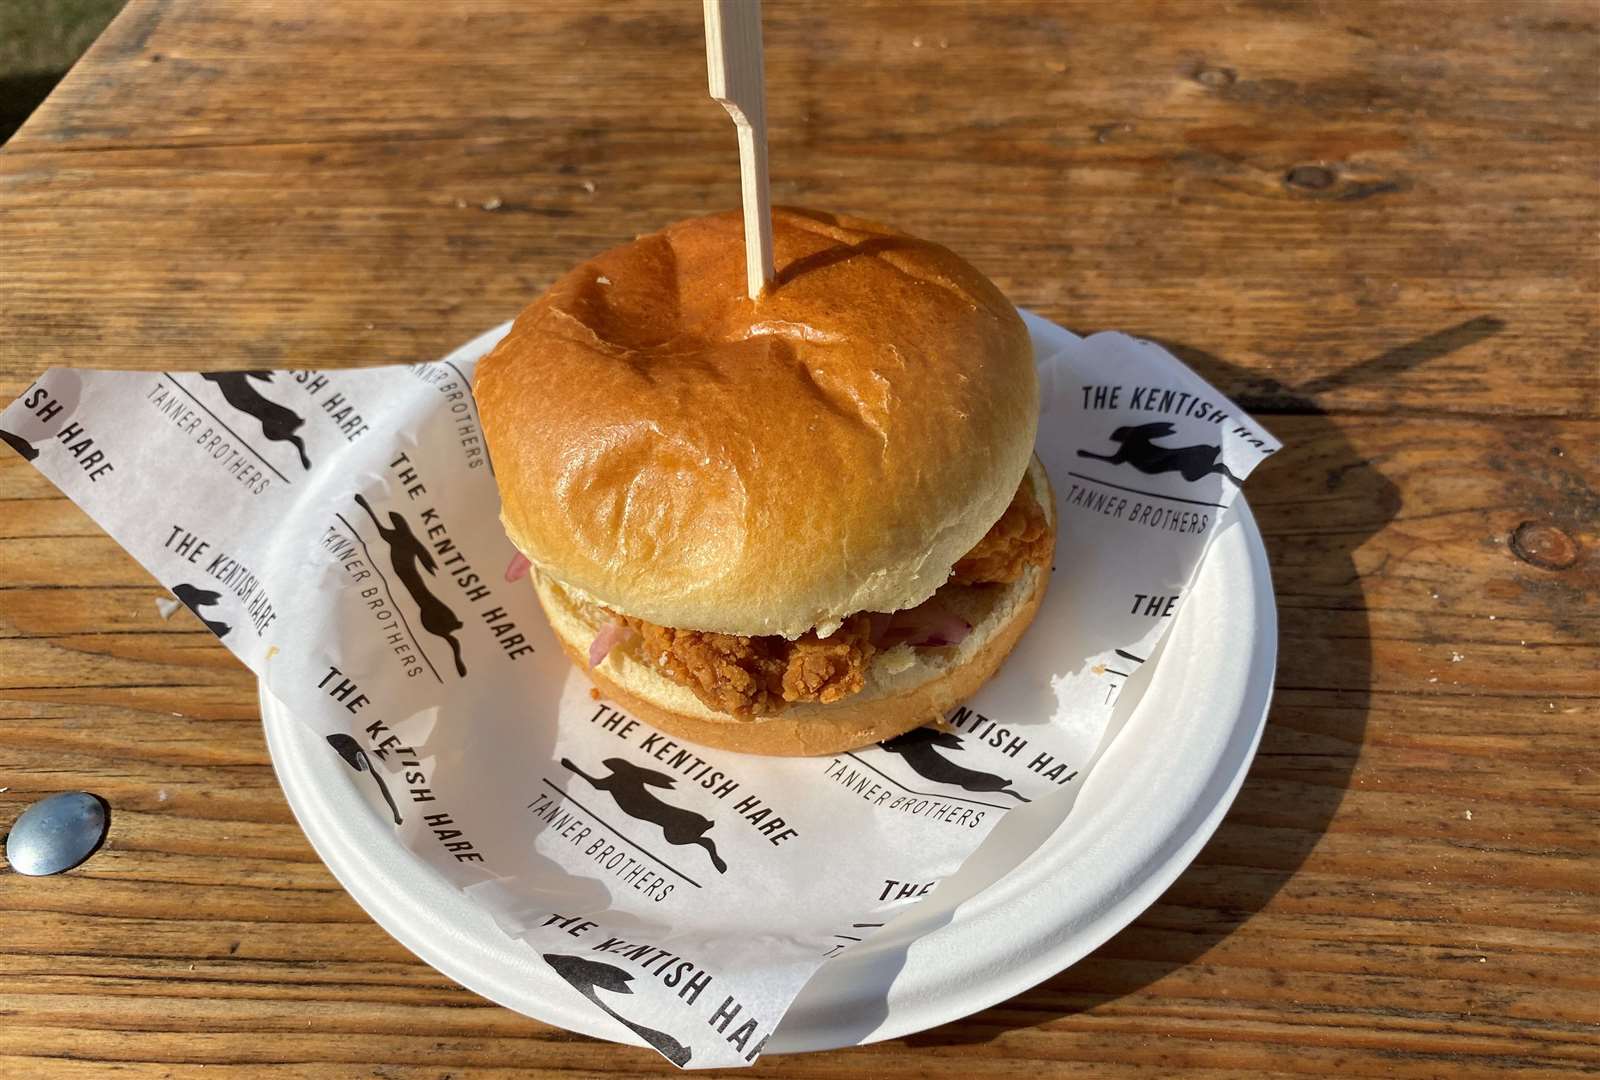 Crispy chicken slider with ranch slaw and spicy sauce from The Kentish Hare